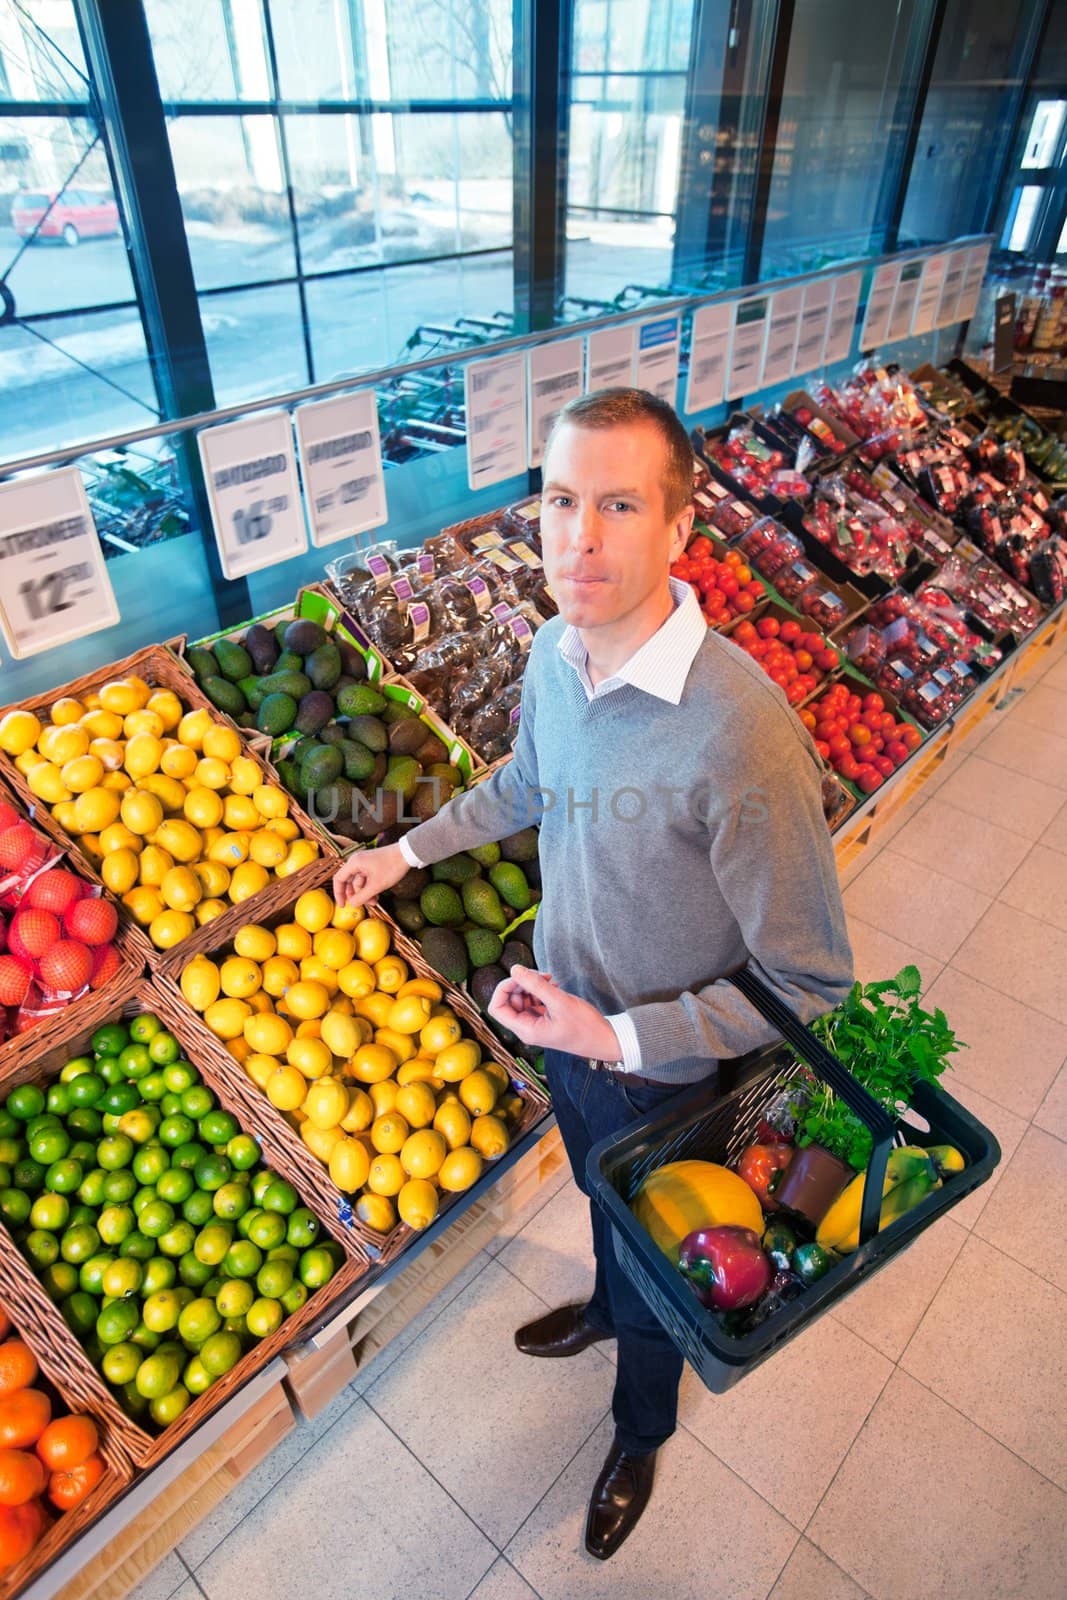 Portrait of a man buying fruits in the supermarket